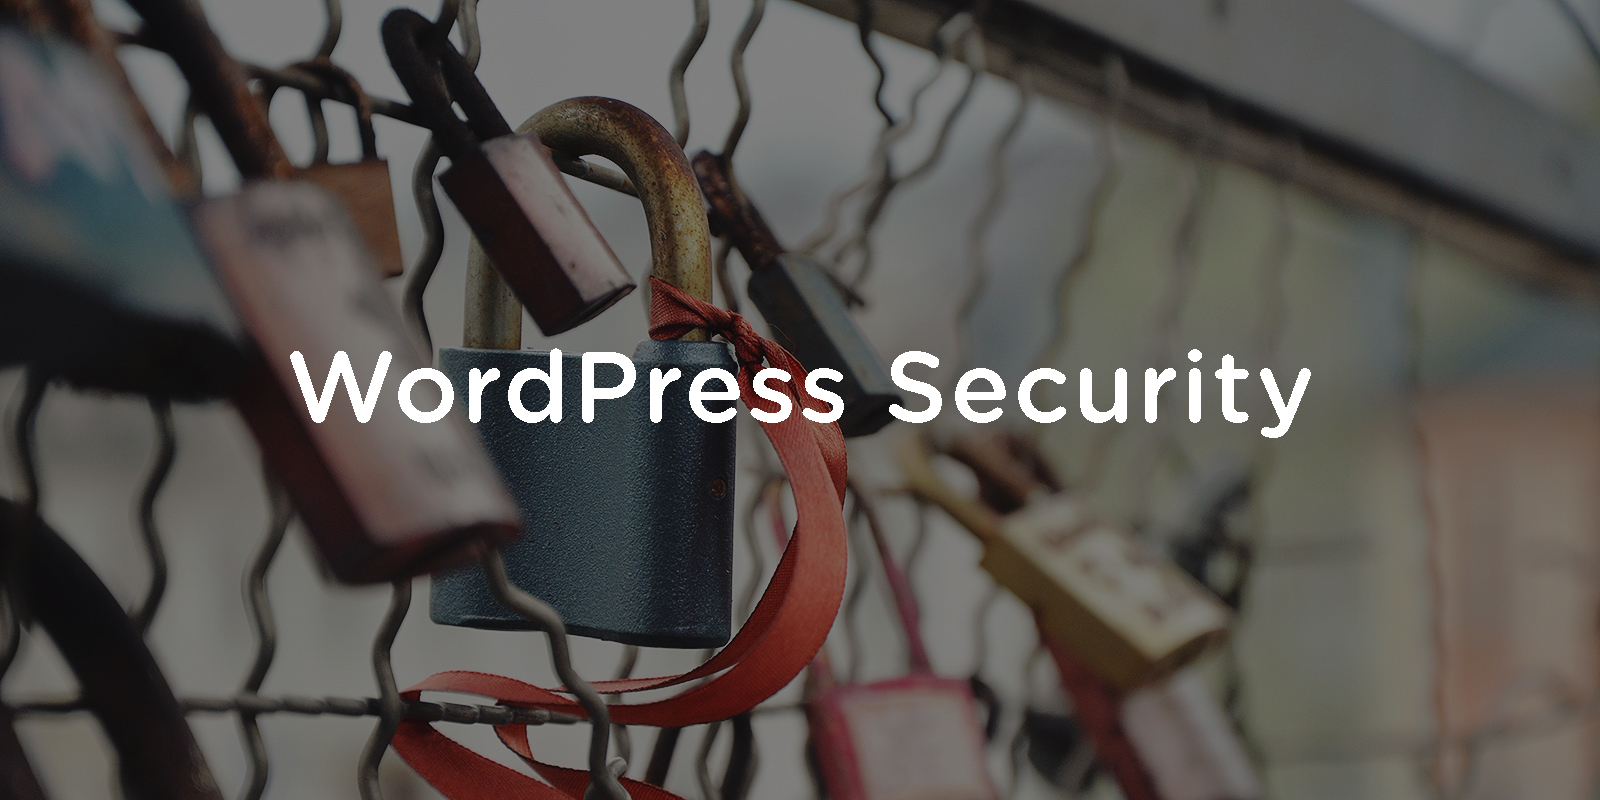 Would WordPress benefit from public relations messaging around security issues?